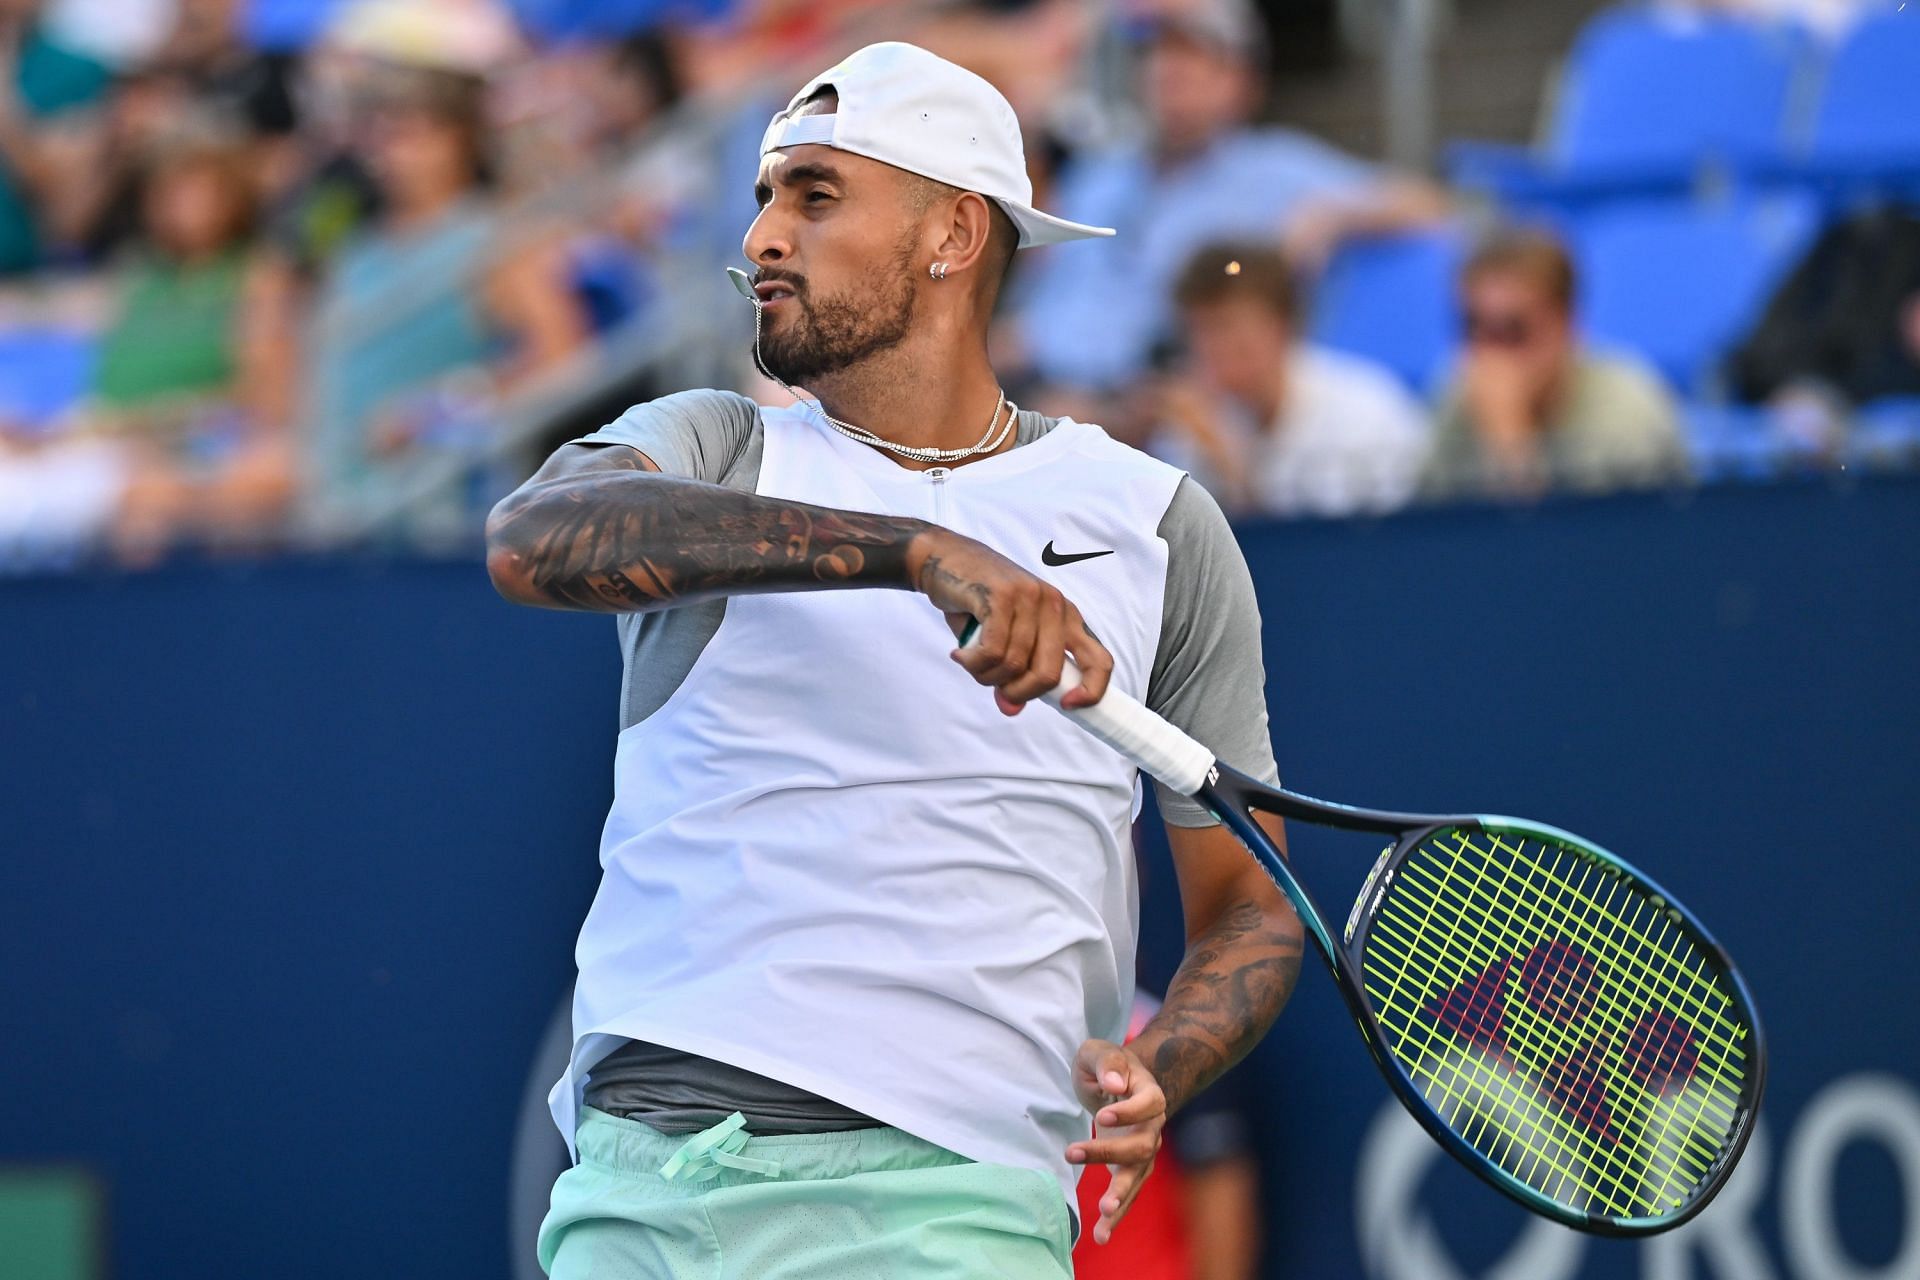 Kyrgios at the National Bank Open Montreal - Day 6